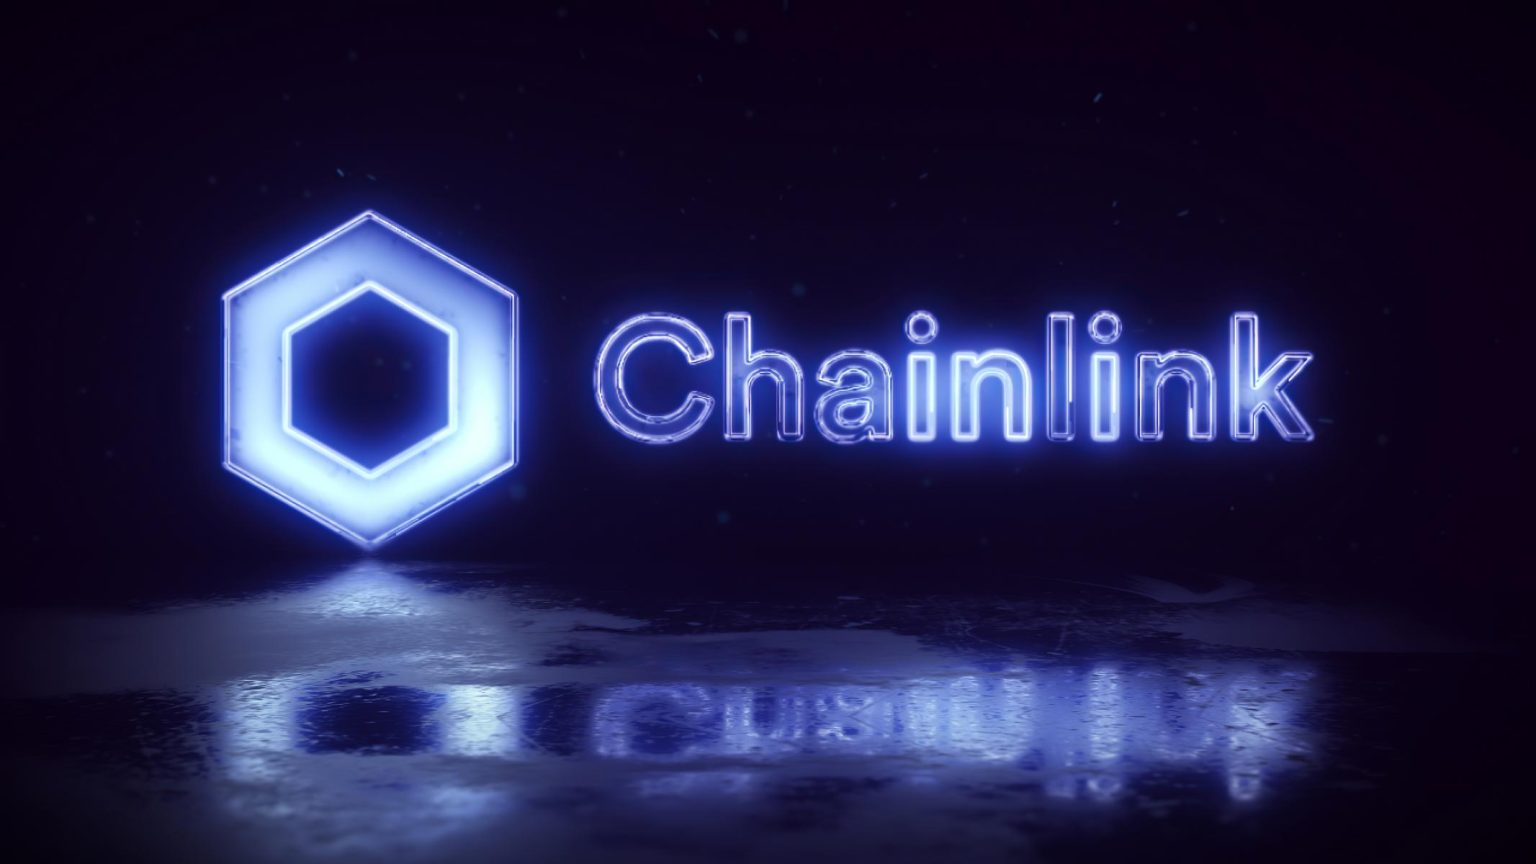 Chainlink-LINK-logo-in-led-lights-with-dark-background